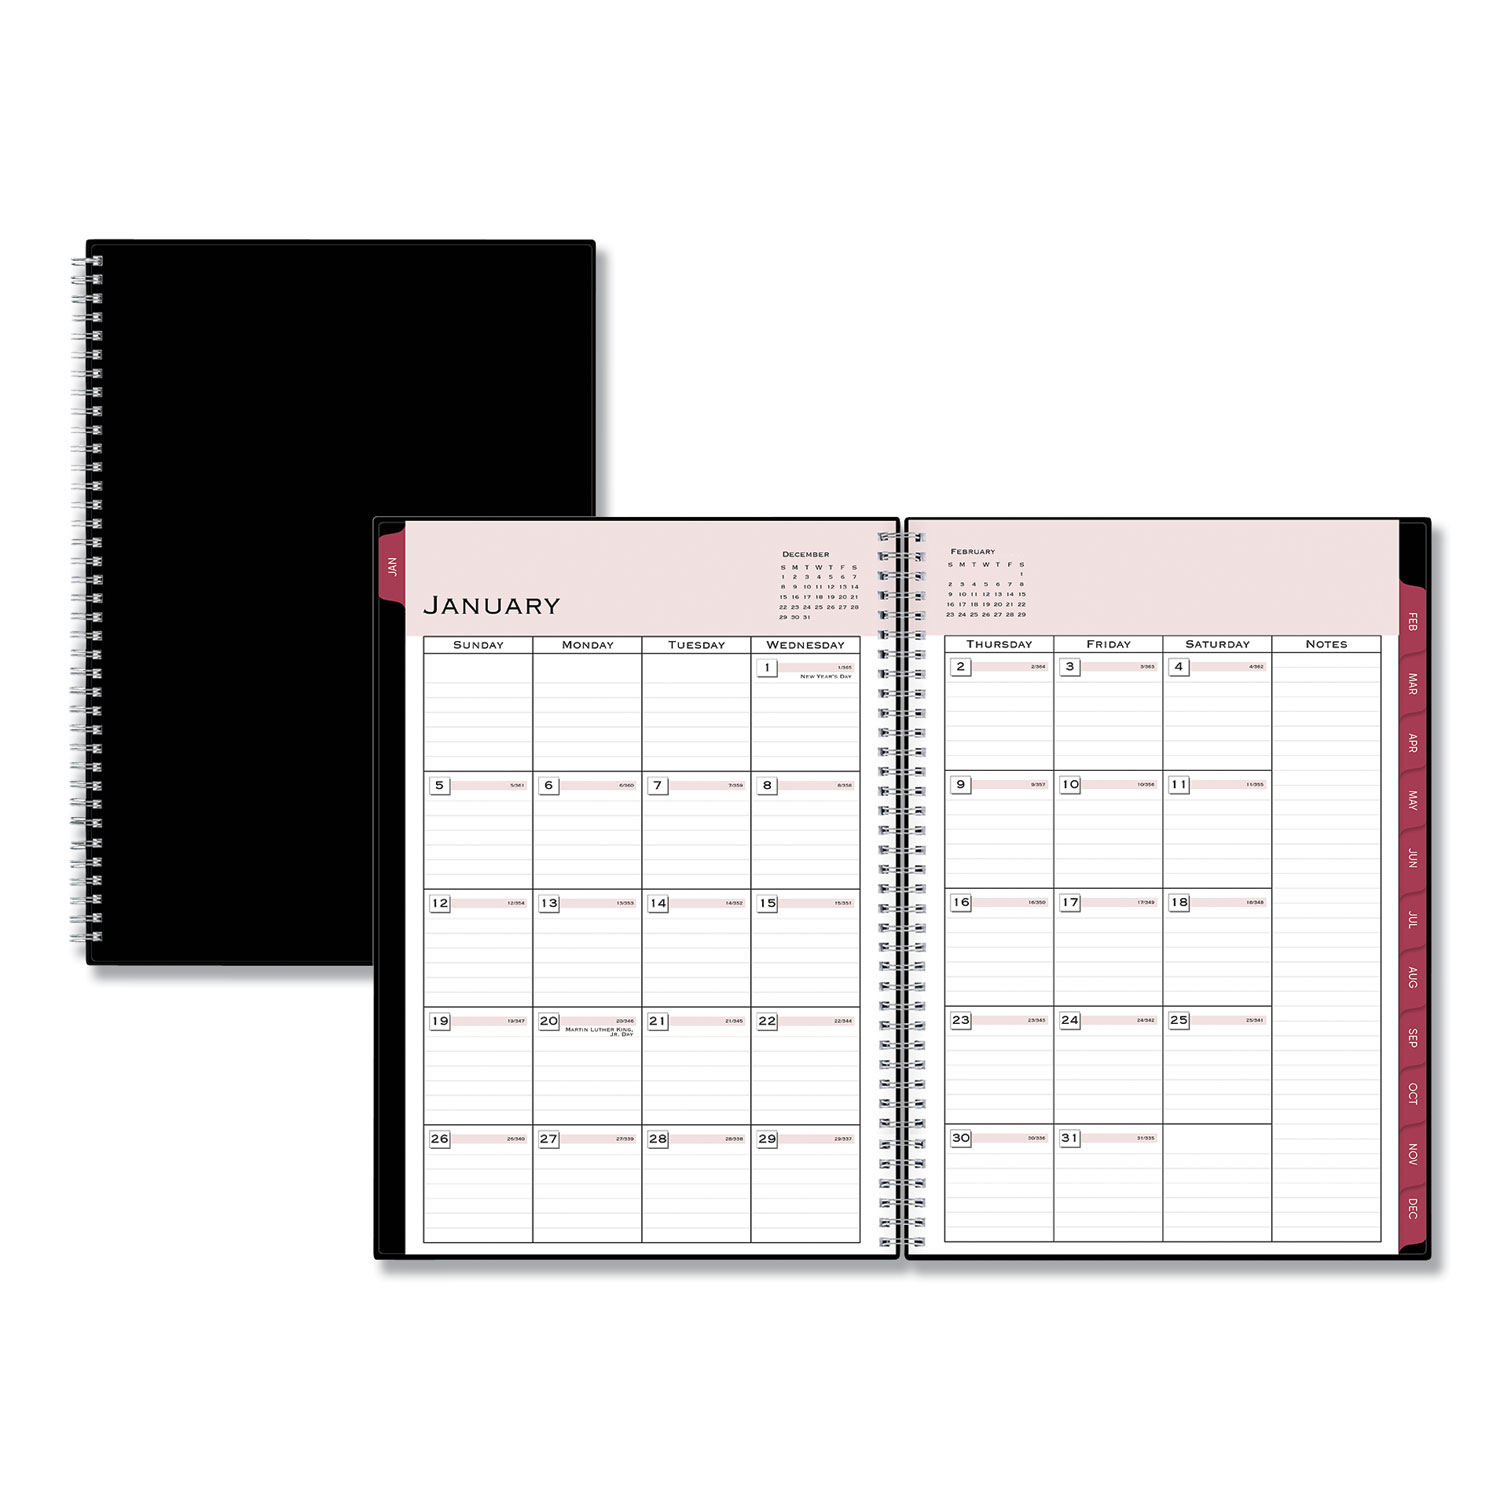  Blue Sky 116055 Classic Red Monthly Planner, 11 7/8 x 7 7/8, Black Cover, 2020 (BLS116055) 